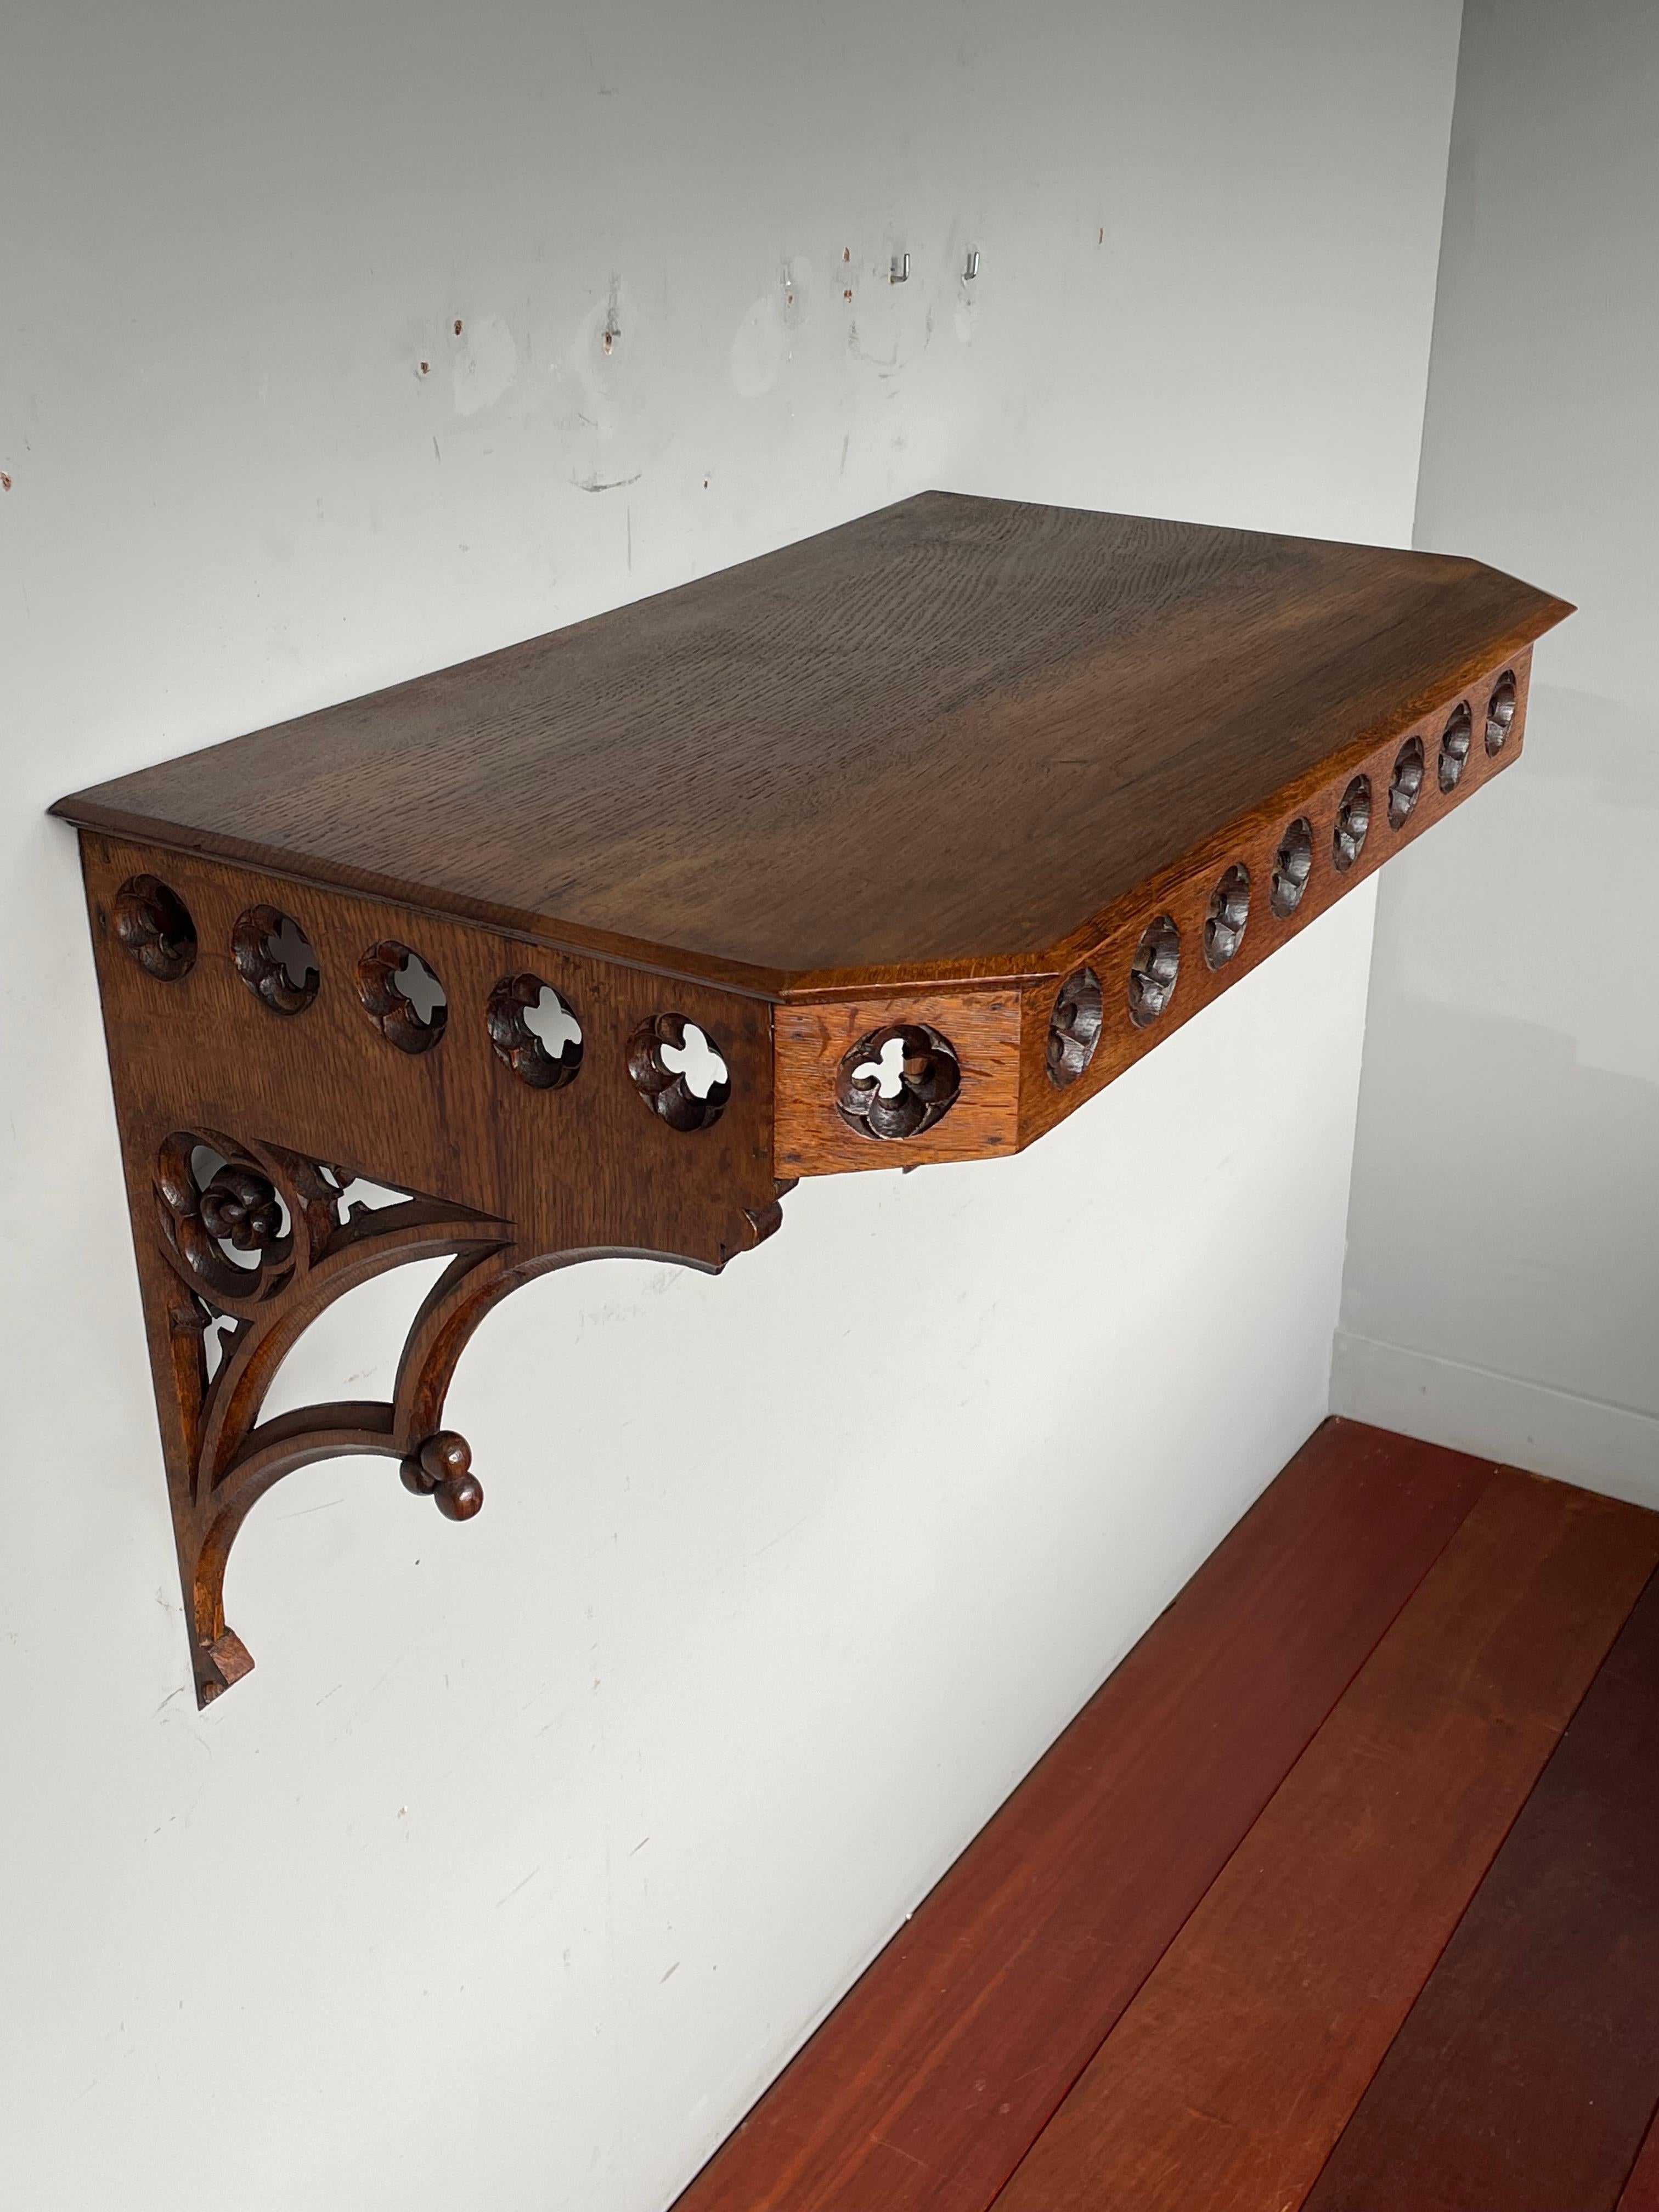 Wonderful and superbly hand carved, 19th century Gothic Revival bracket / side table.

This all handcrafted, Gothic Revival wall bracket has the ideal size and shape to be used as a large bracket or as a small sidetable on your wall. Design-wise